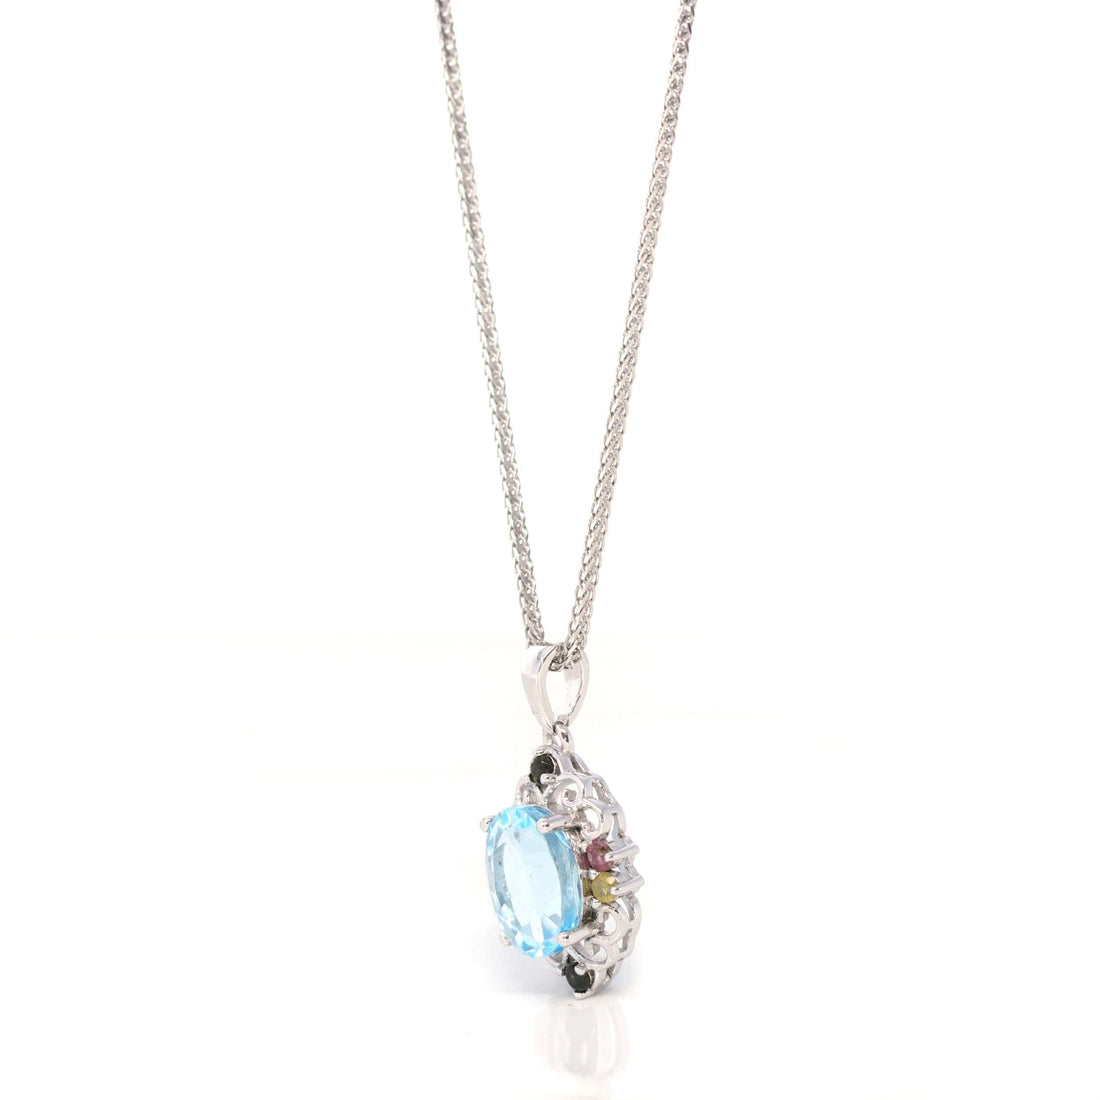 Baikalla Jewelry Topaz Necklace Sterling Silver Topaz Necklace With Tourmaline and Zircon Accent Stones